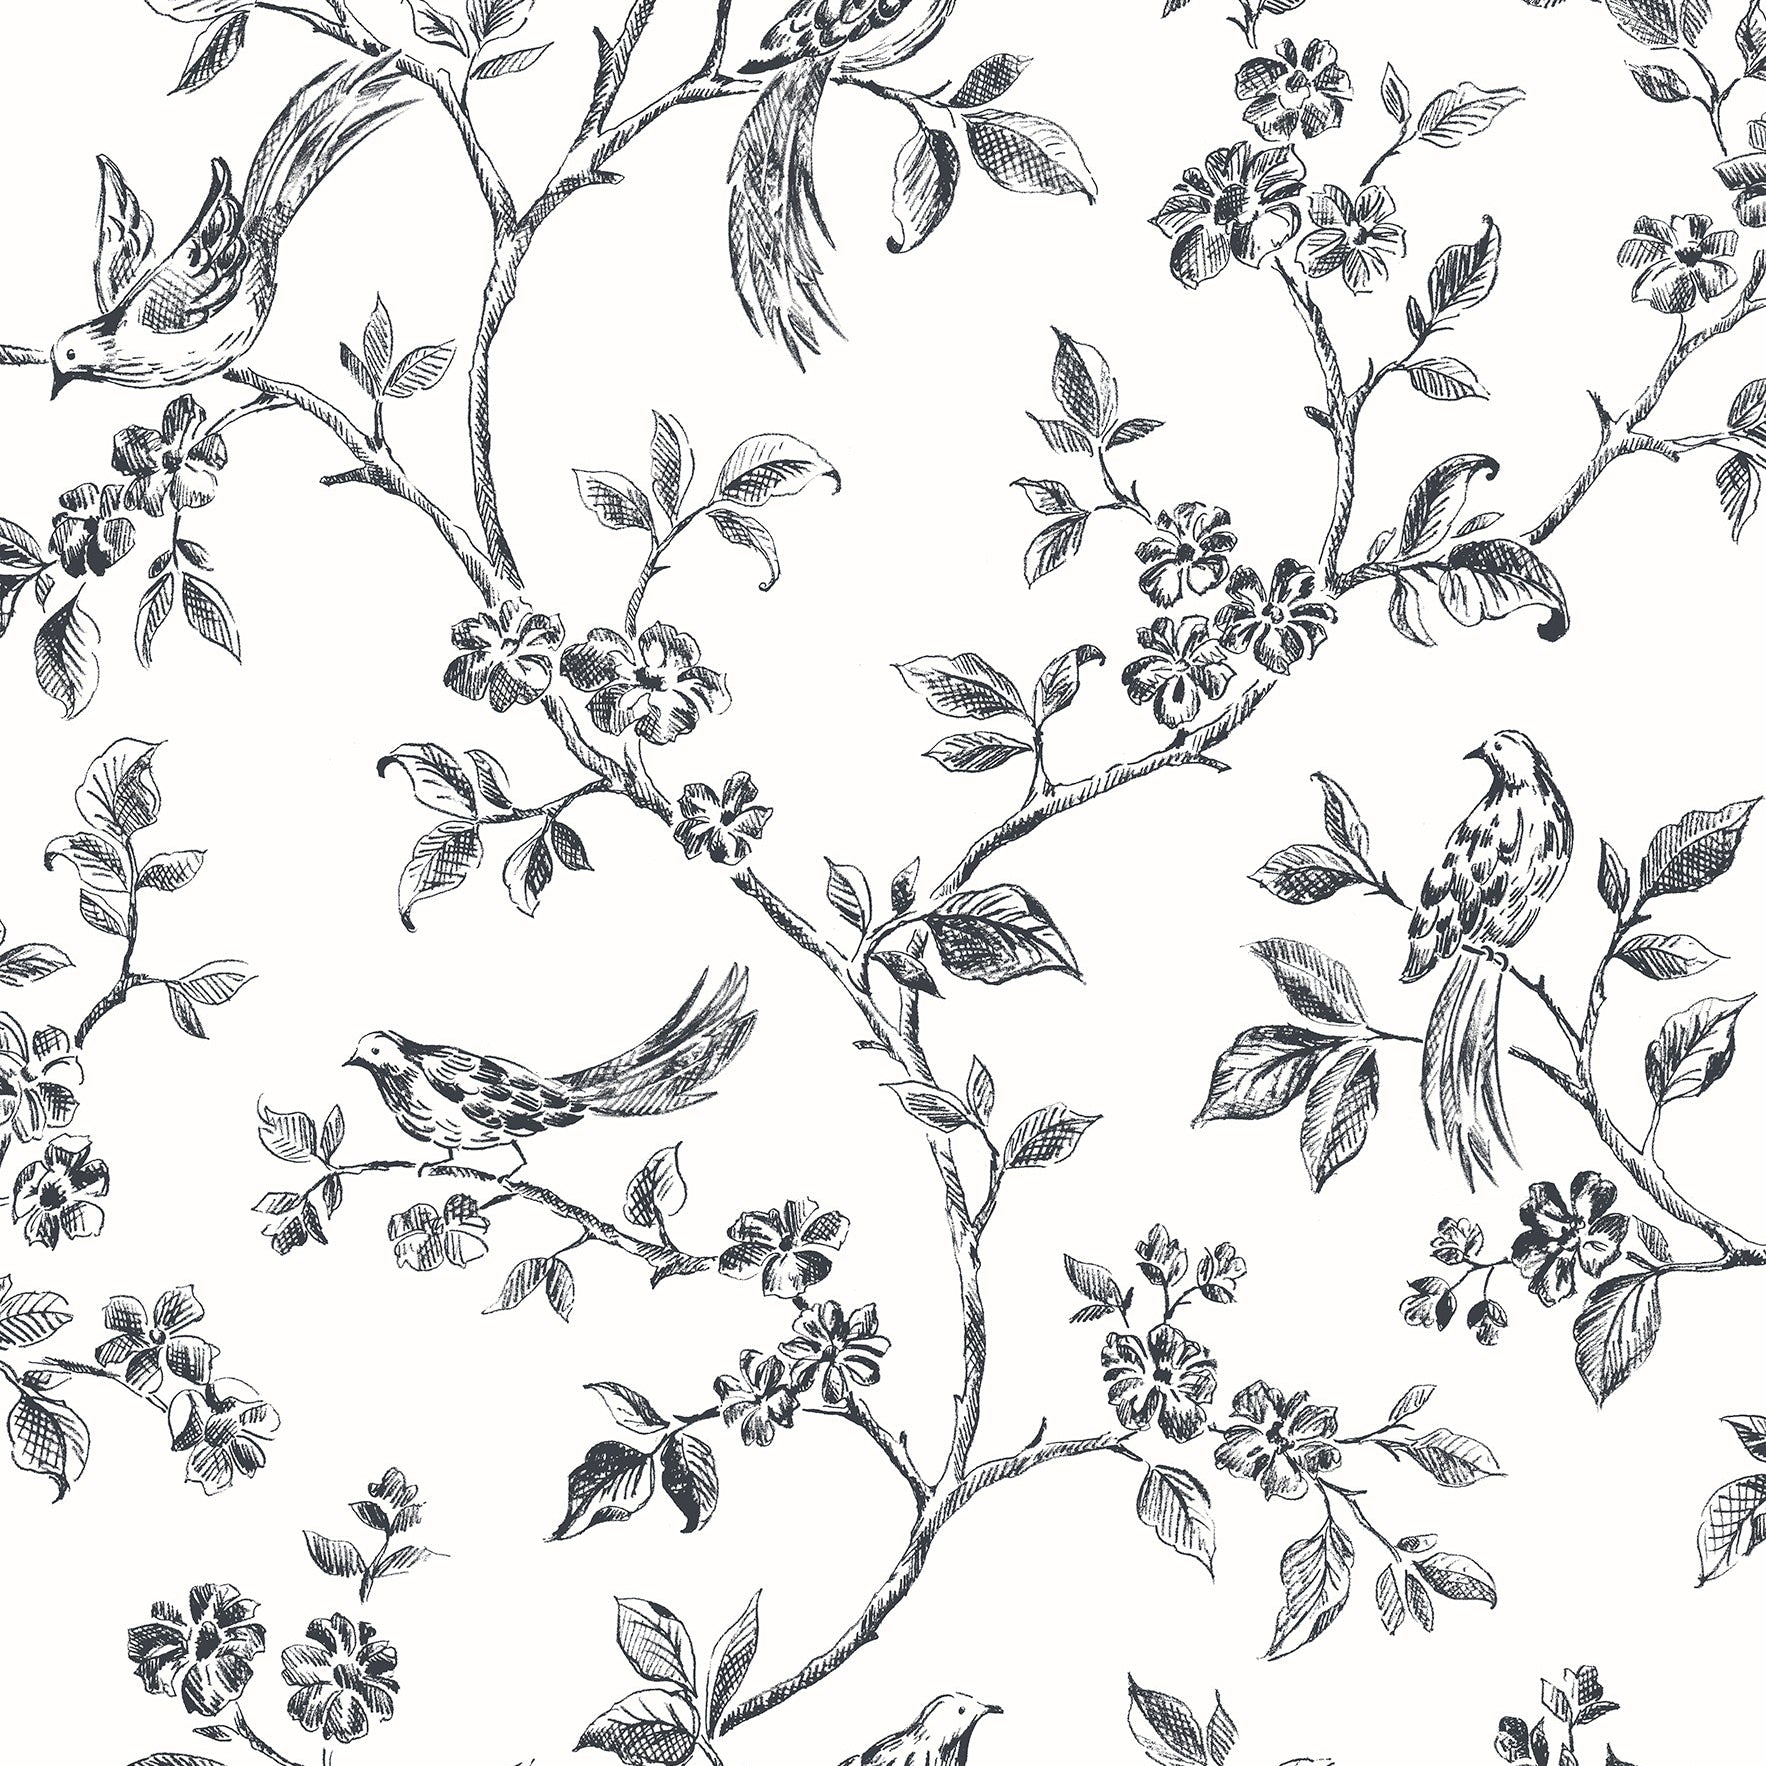 View 2836-24976 Shades of Grey Blacks Florals & Flowers Wallpaper by Advantage